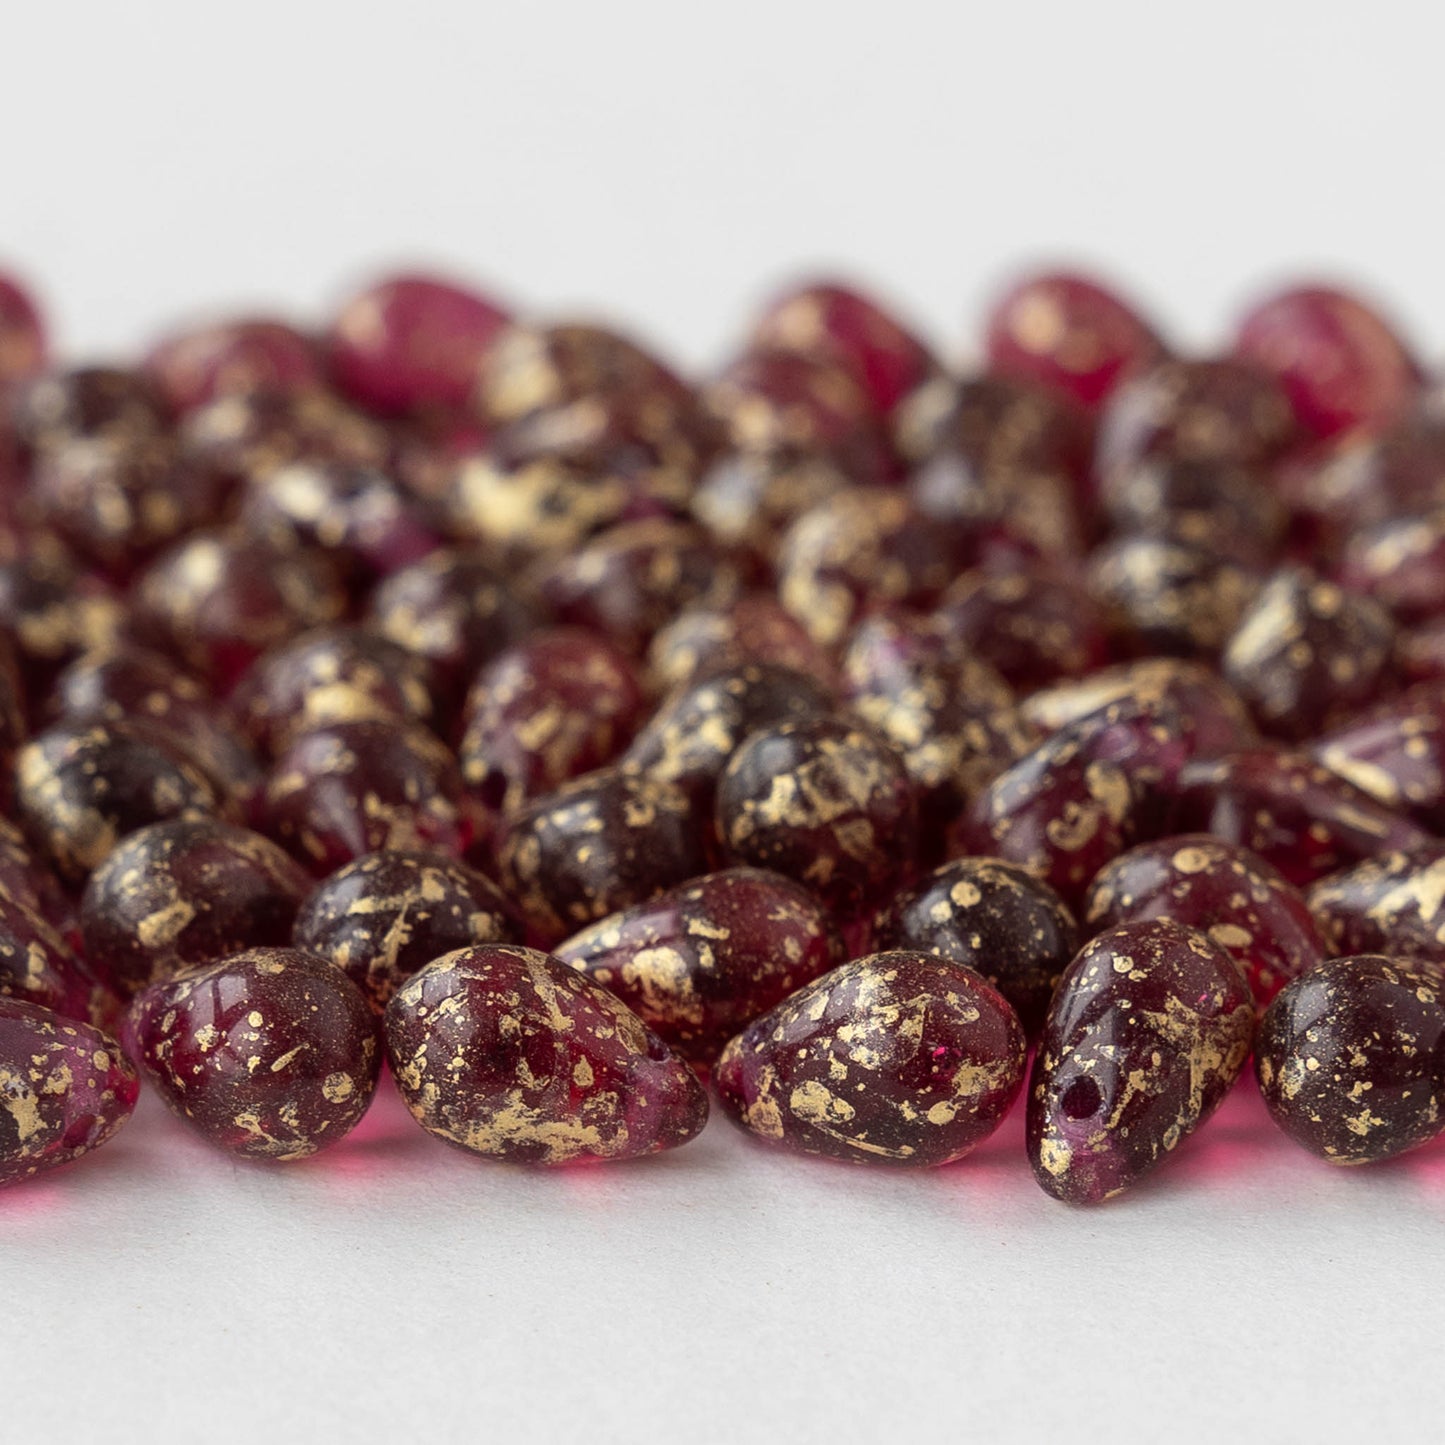 6x9mm Glass Teardrop Beads - Antique Fuchsia with Gold Dust - 30 Beads